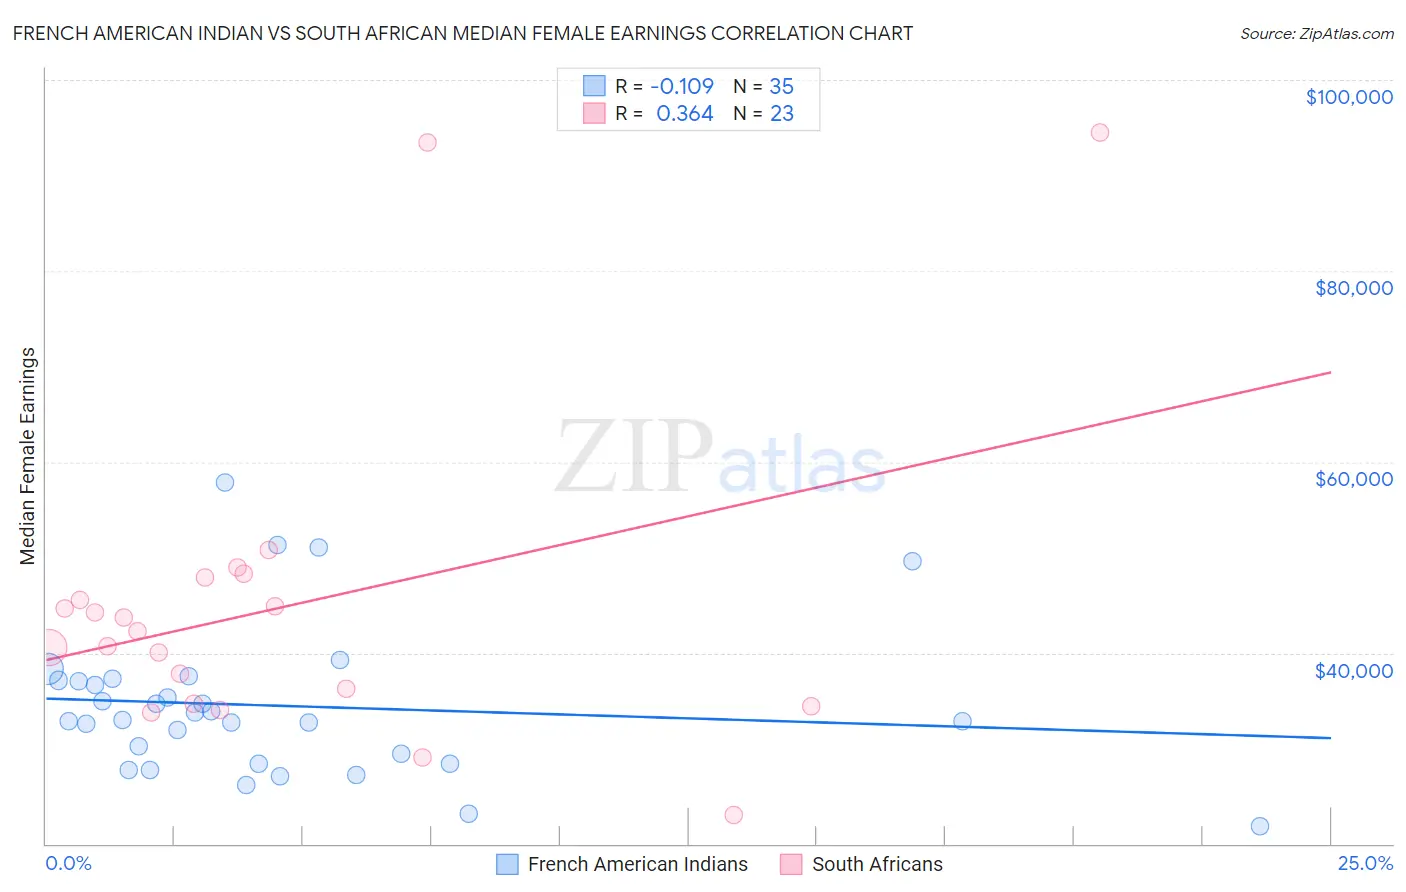 French American Indian vs South African Median Female Earnings